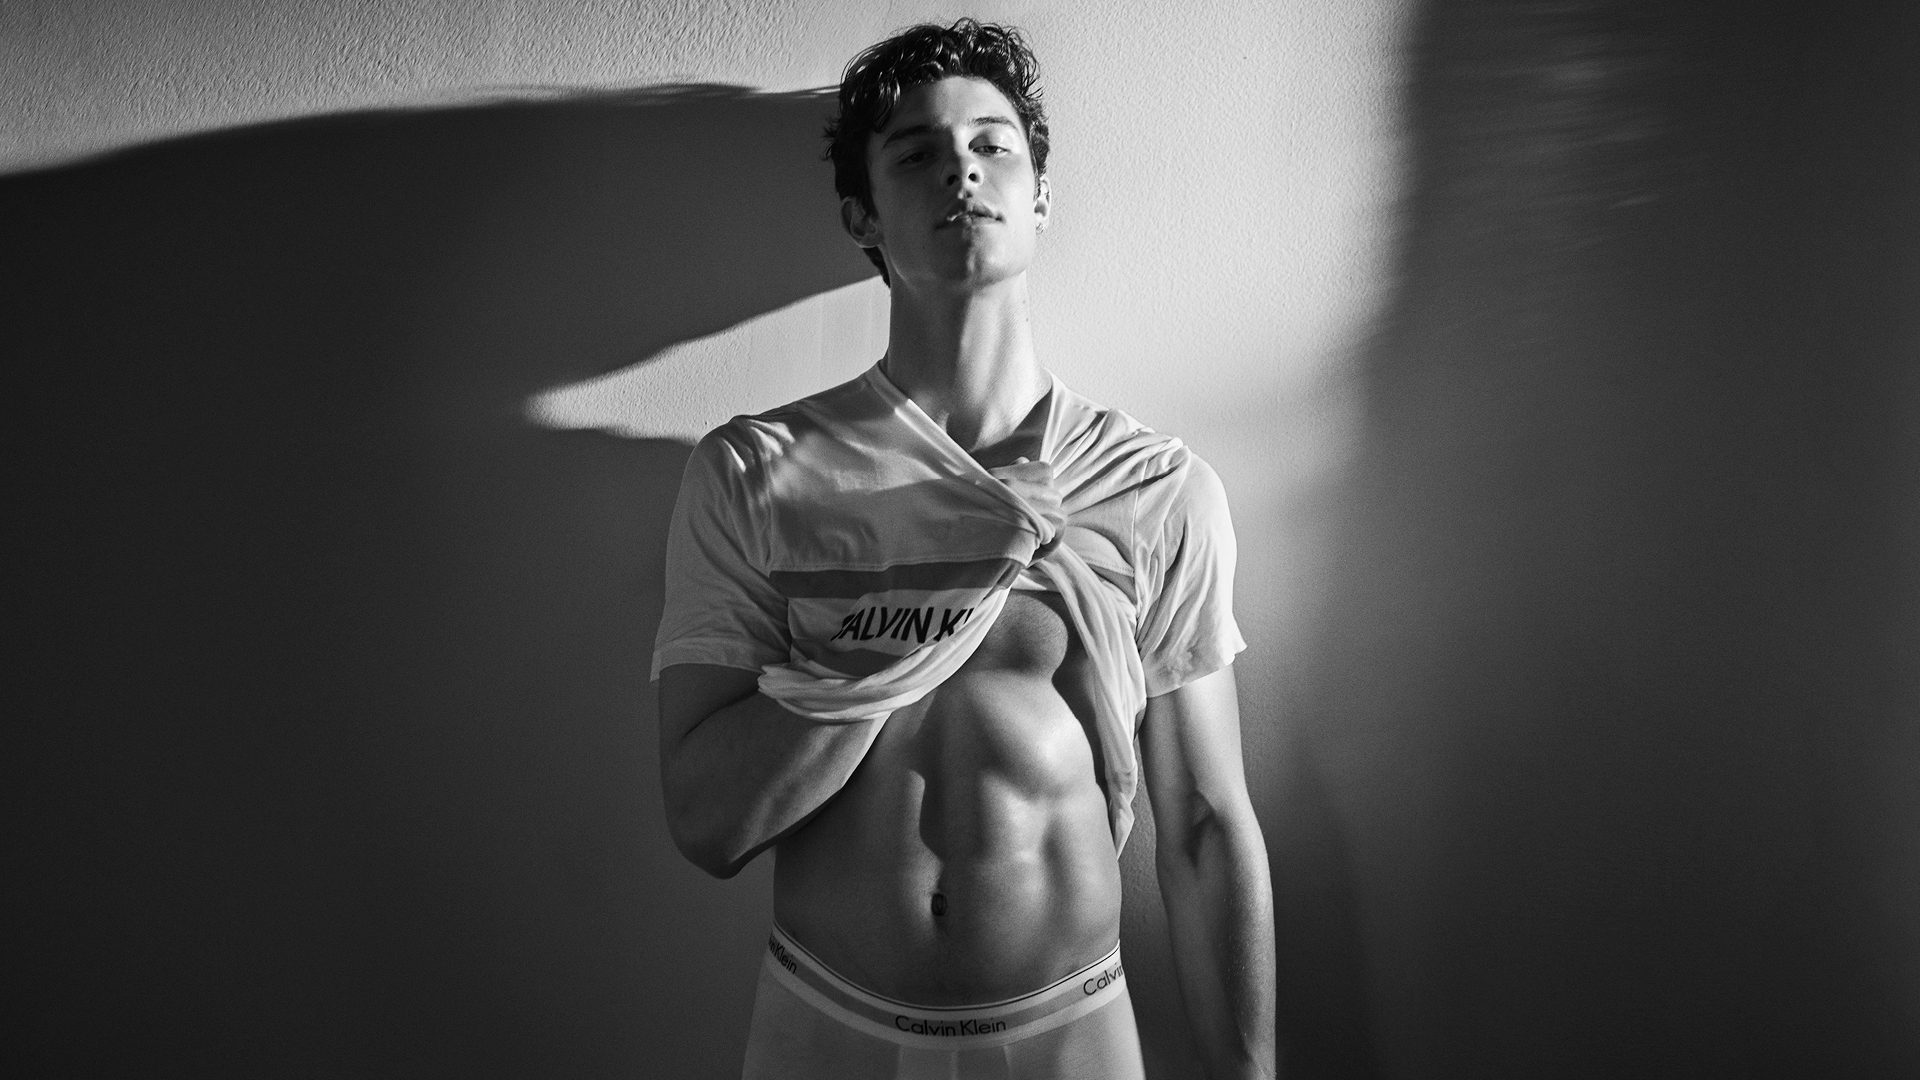 Shawn Mendes stars in the latest Calvin Klein campaign